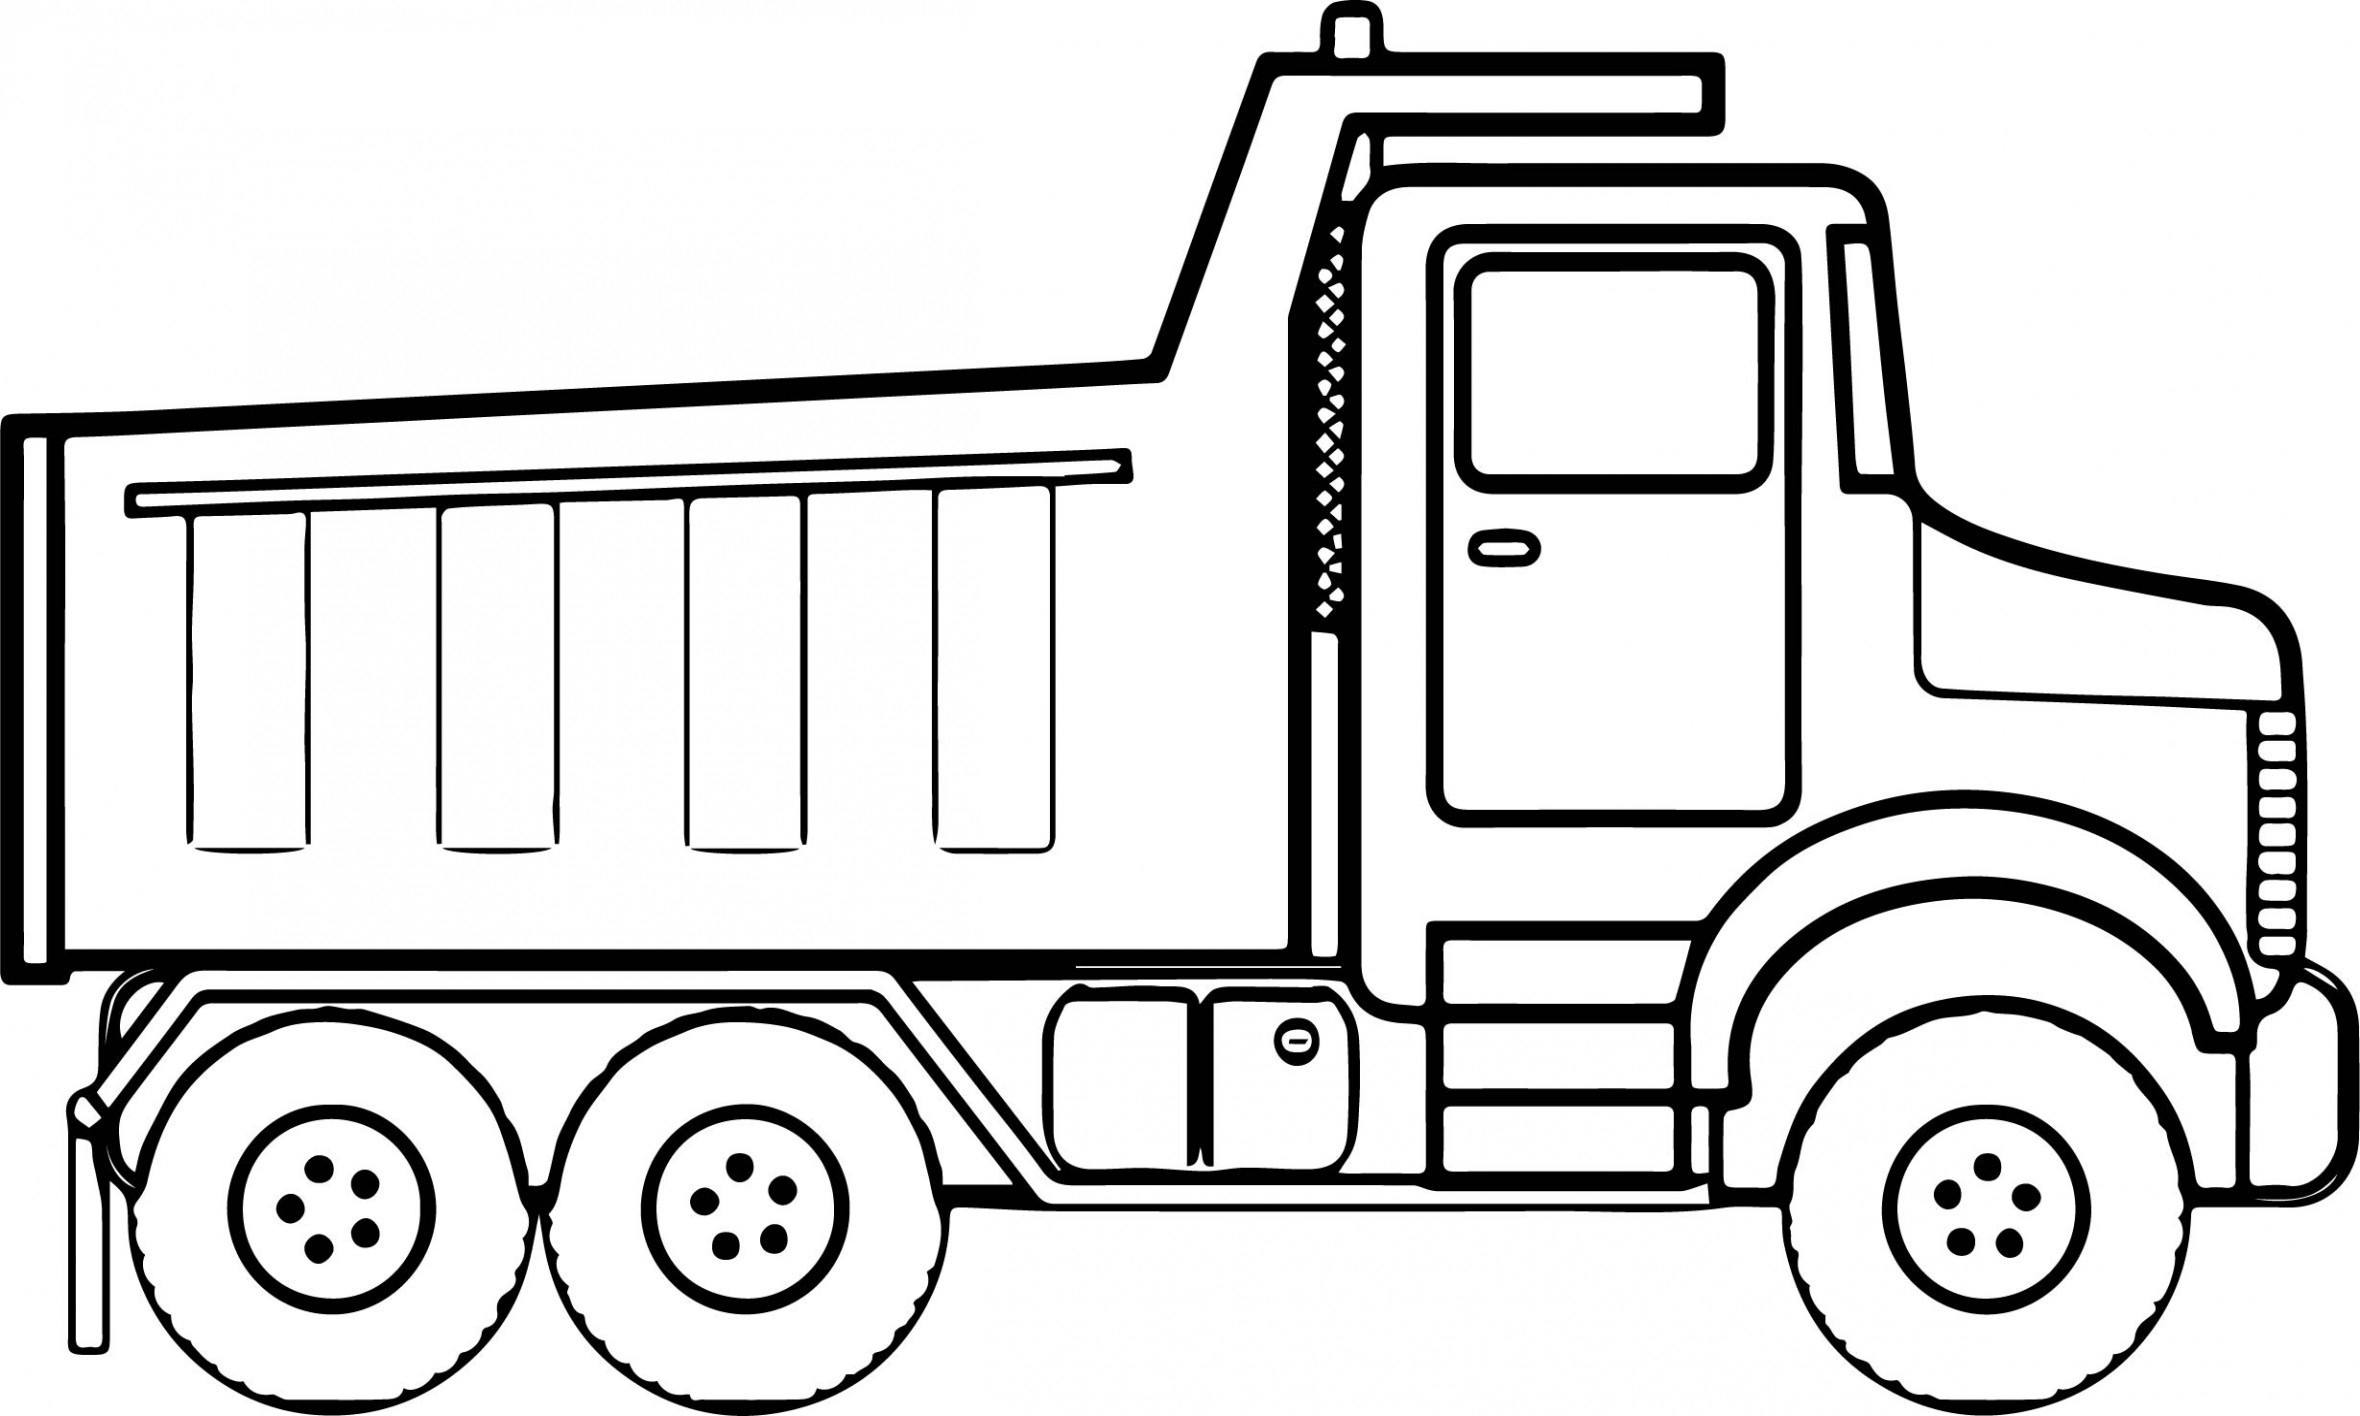 Truck Coloring Pages For Preschoolers New Preschool Truck Coloring Sheets Cleanty